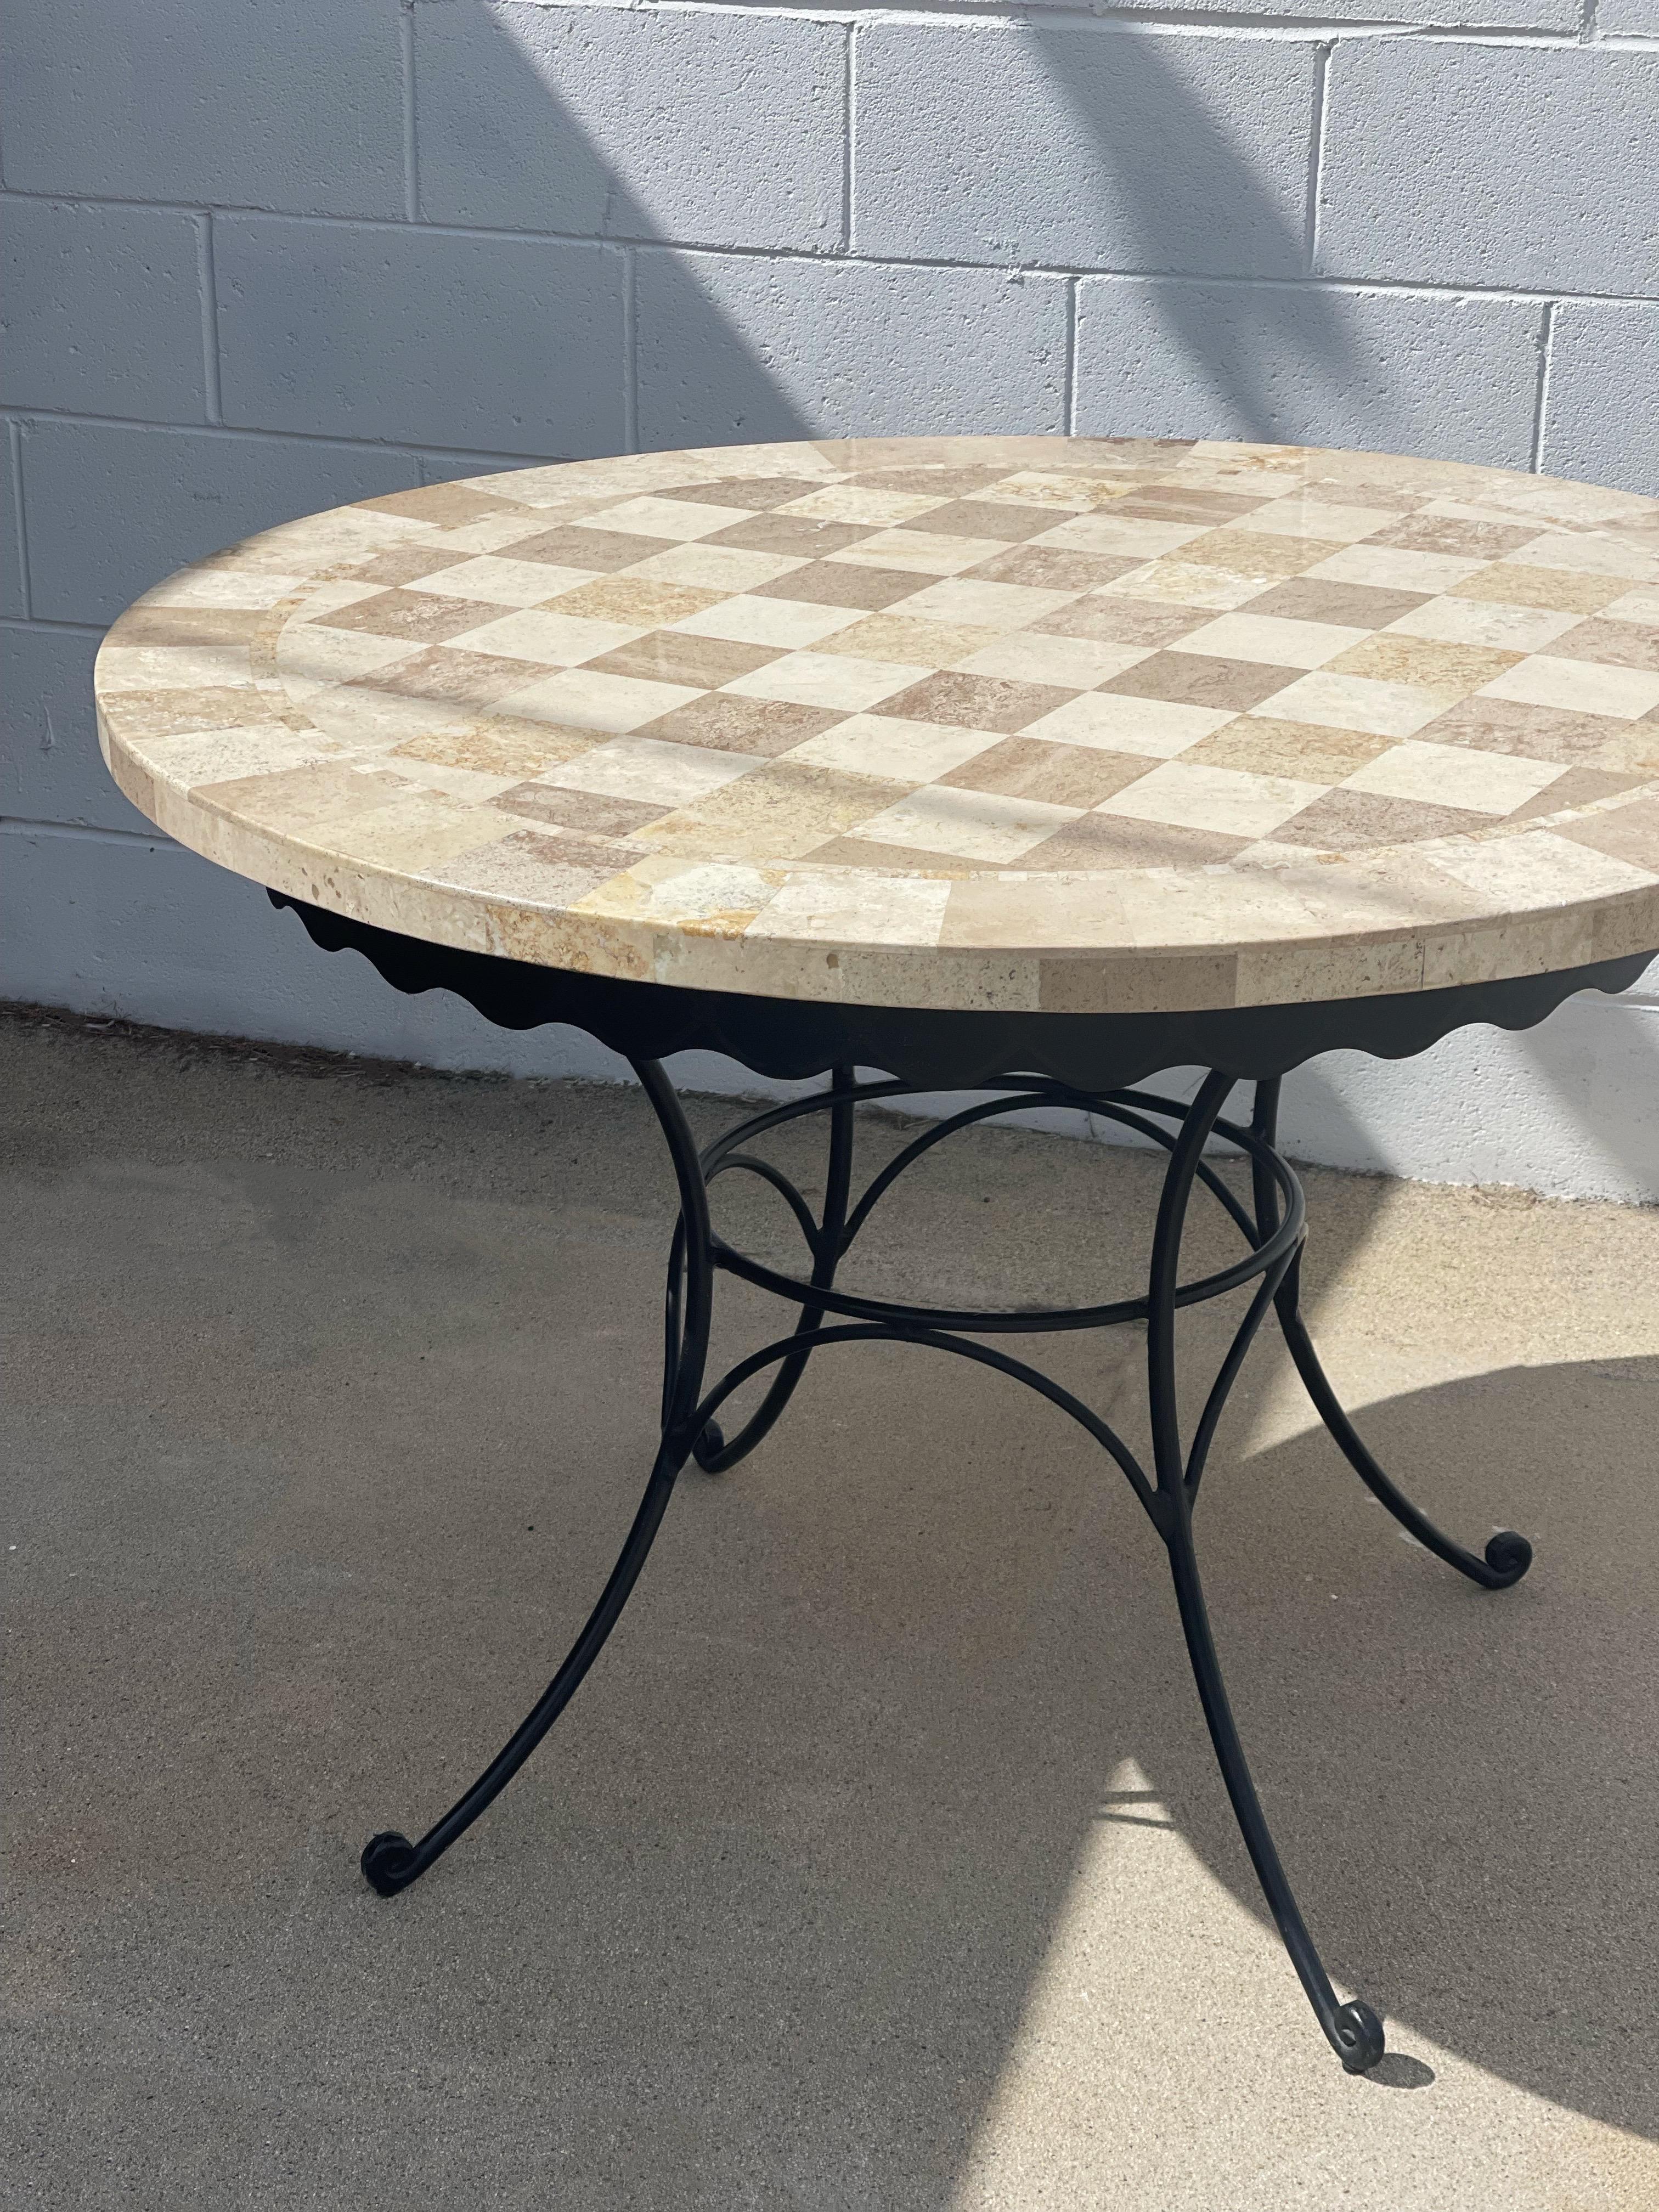 Checkered stone table top with a wrought iron scalloped base. Great for a breakfast nook or sheltered patio. In beautiful condition.